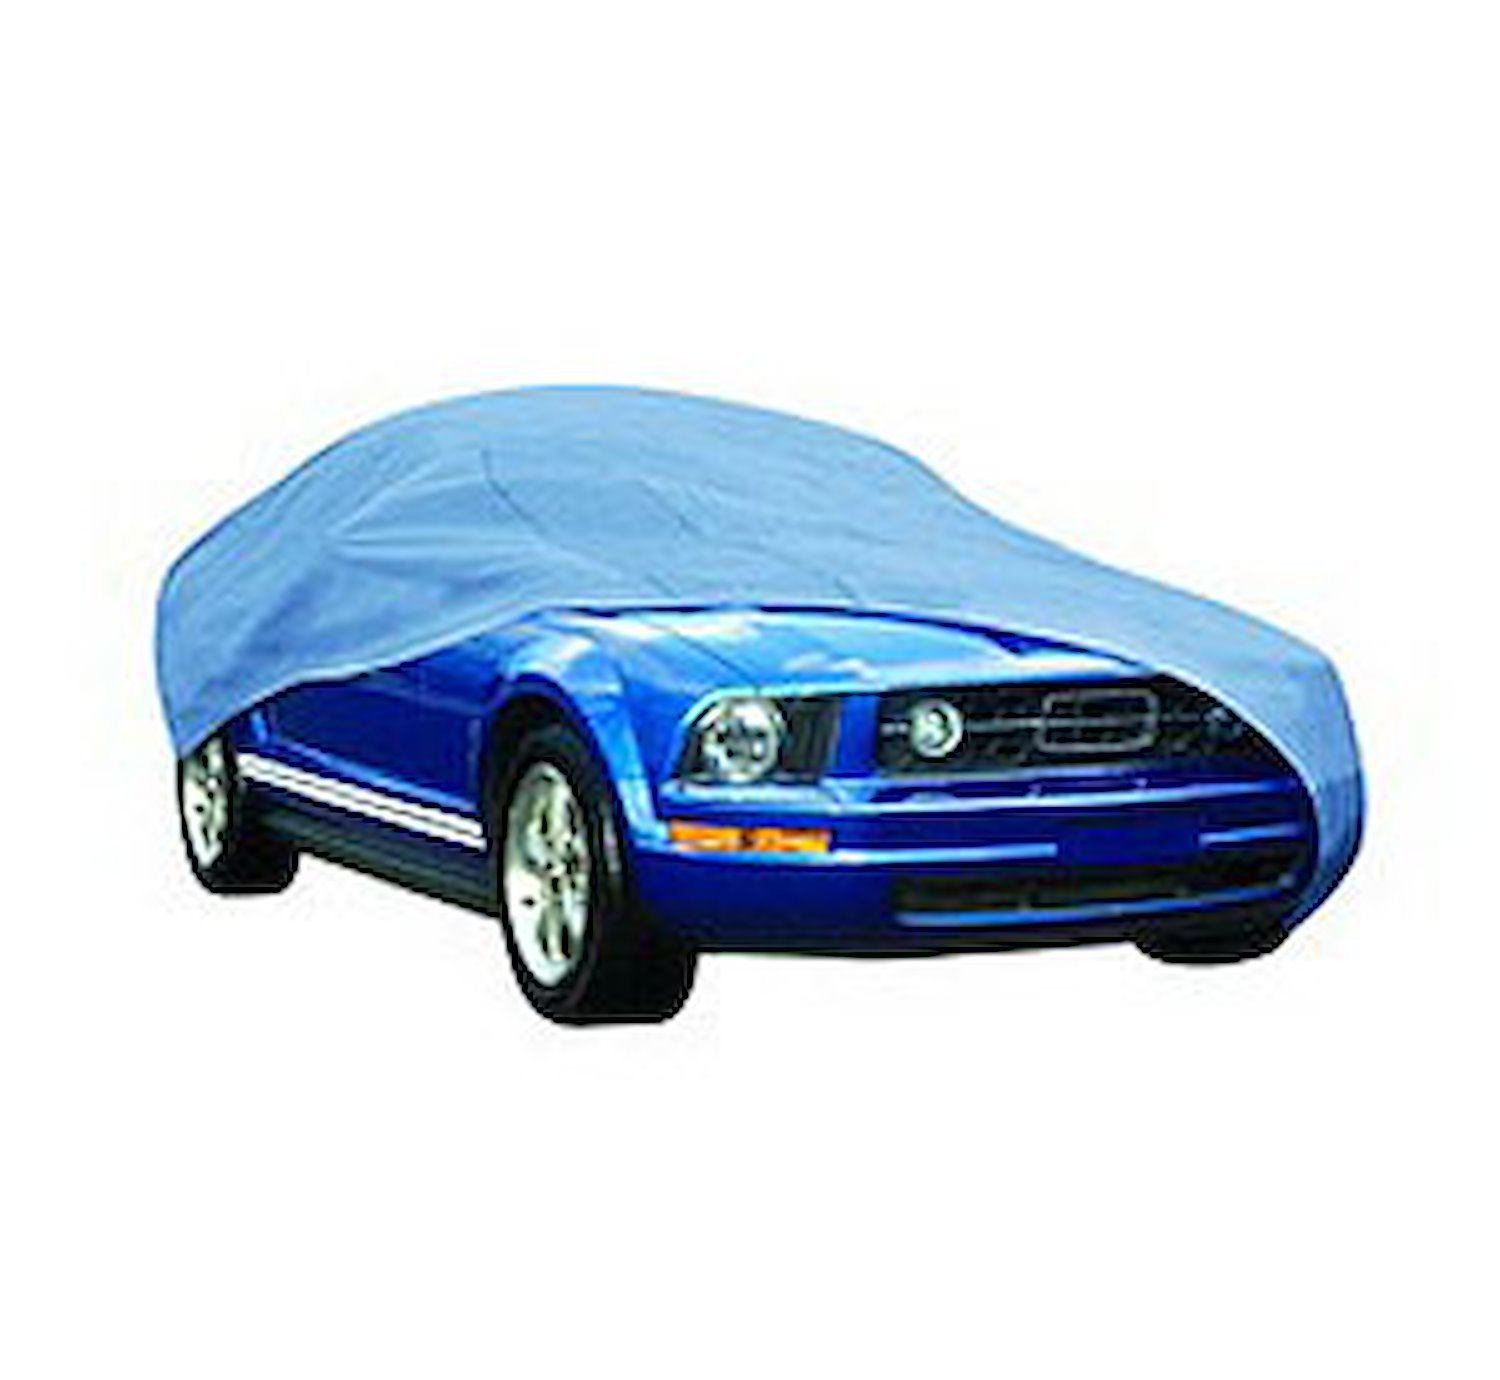 Duro Station Wagon Cover Fits Up To 16" 8" In Length